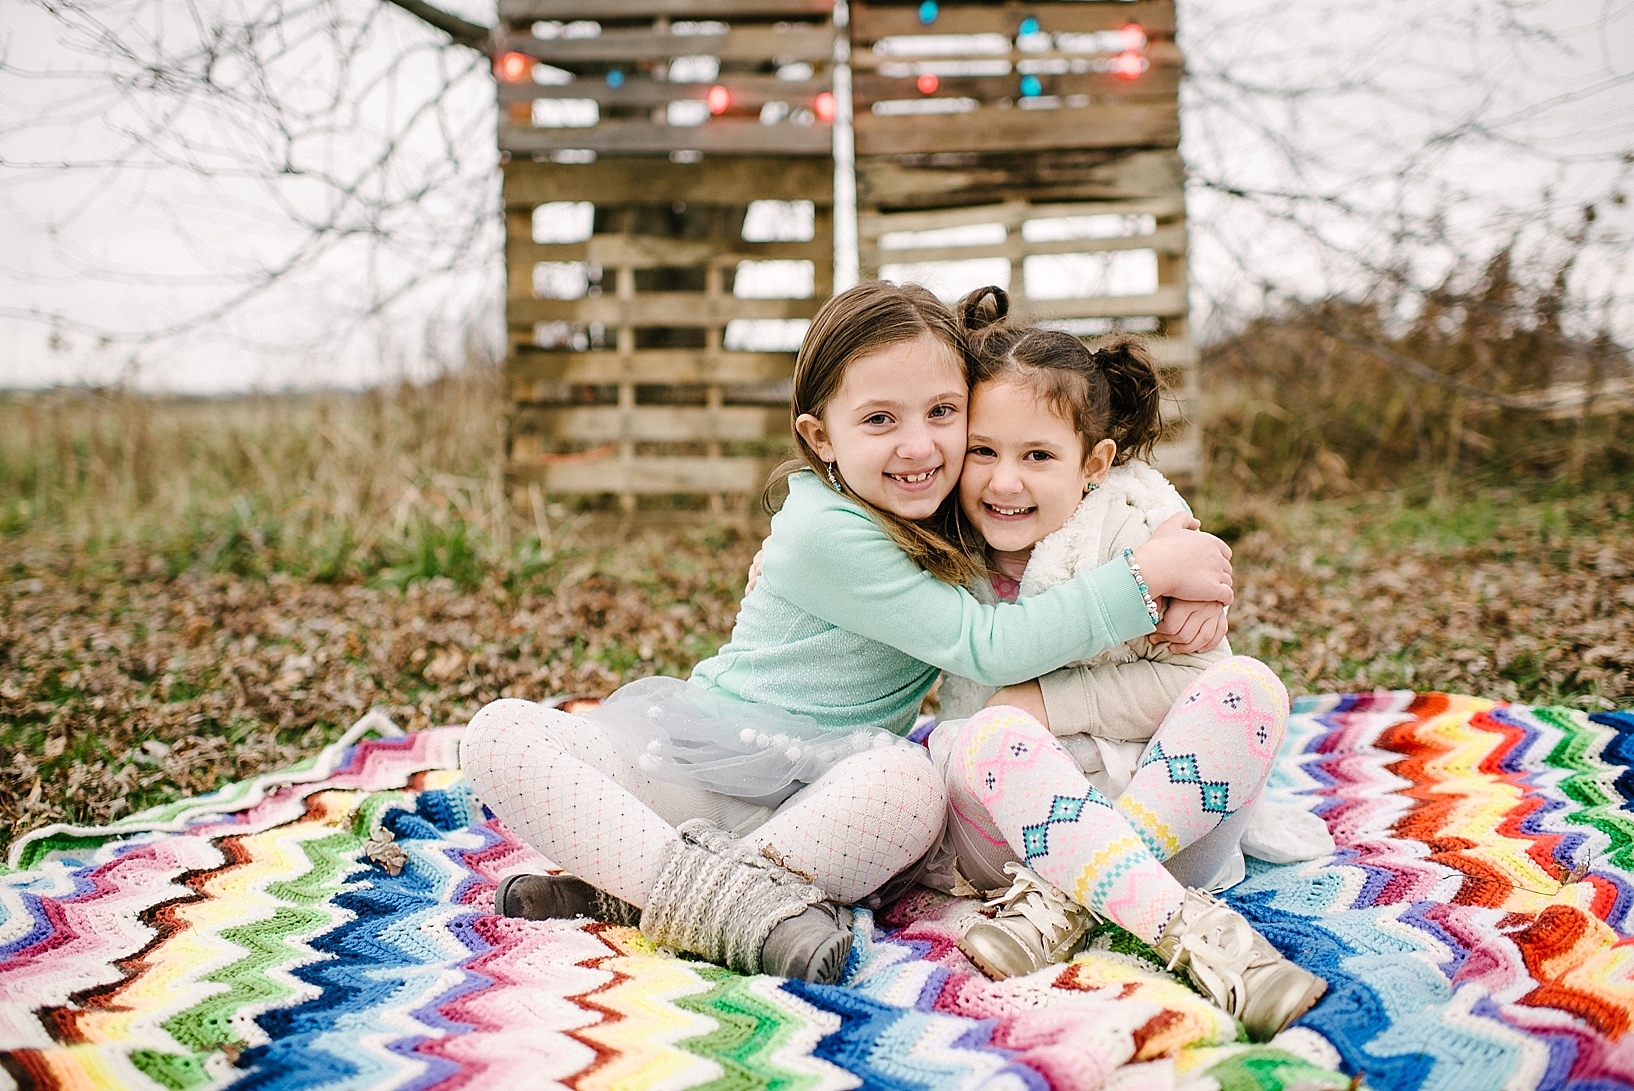 sisters sitting on colorful knit blanket hugging with Christmas lights in the background